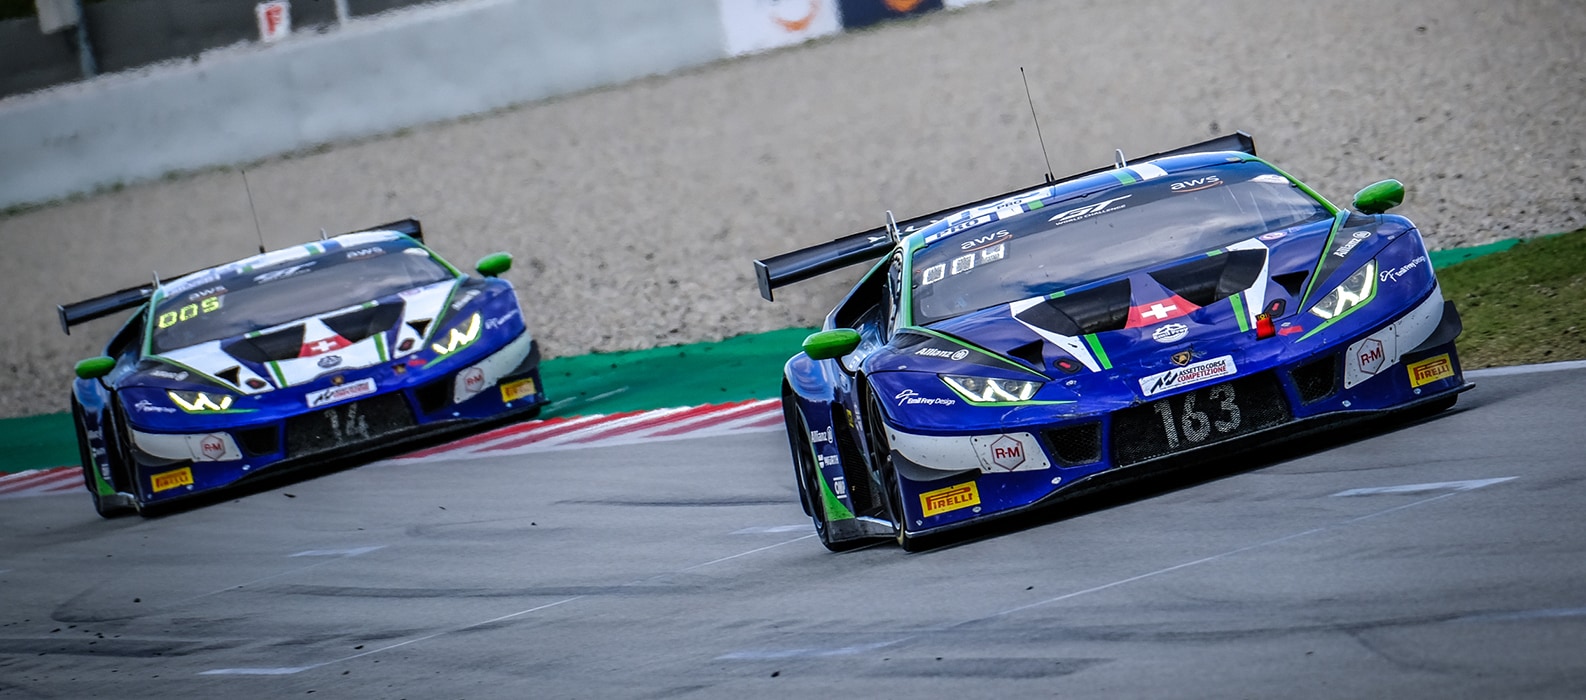 Emil Frey Racing expands to three Lamborghini car effort for GT World  Challenge Europe